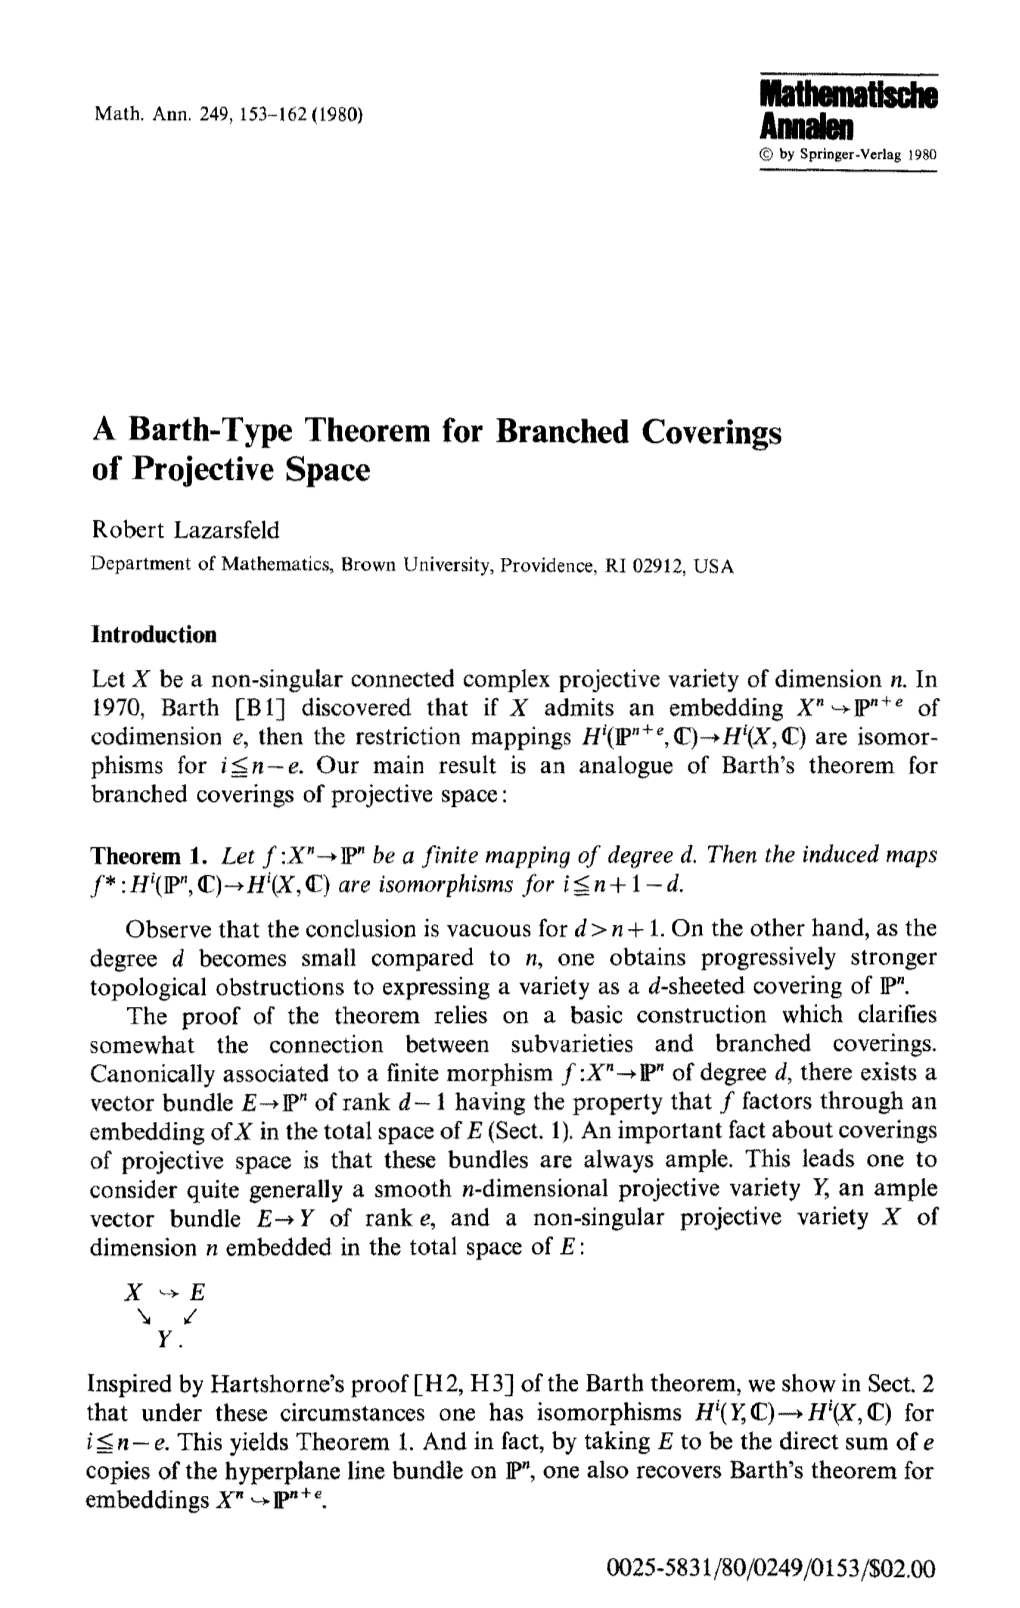 A Barth-Type Theorem for Branched Coverings of Projective Space